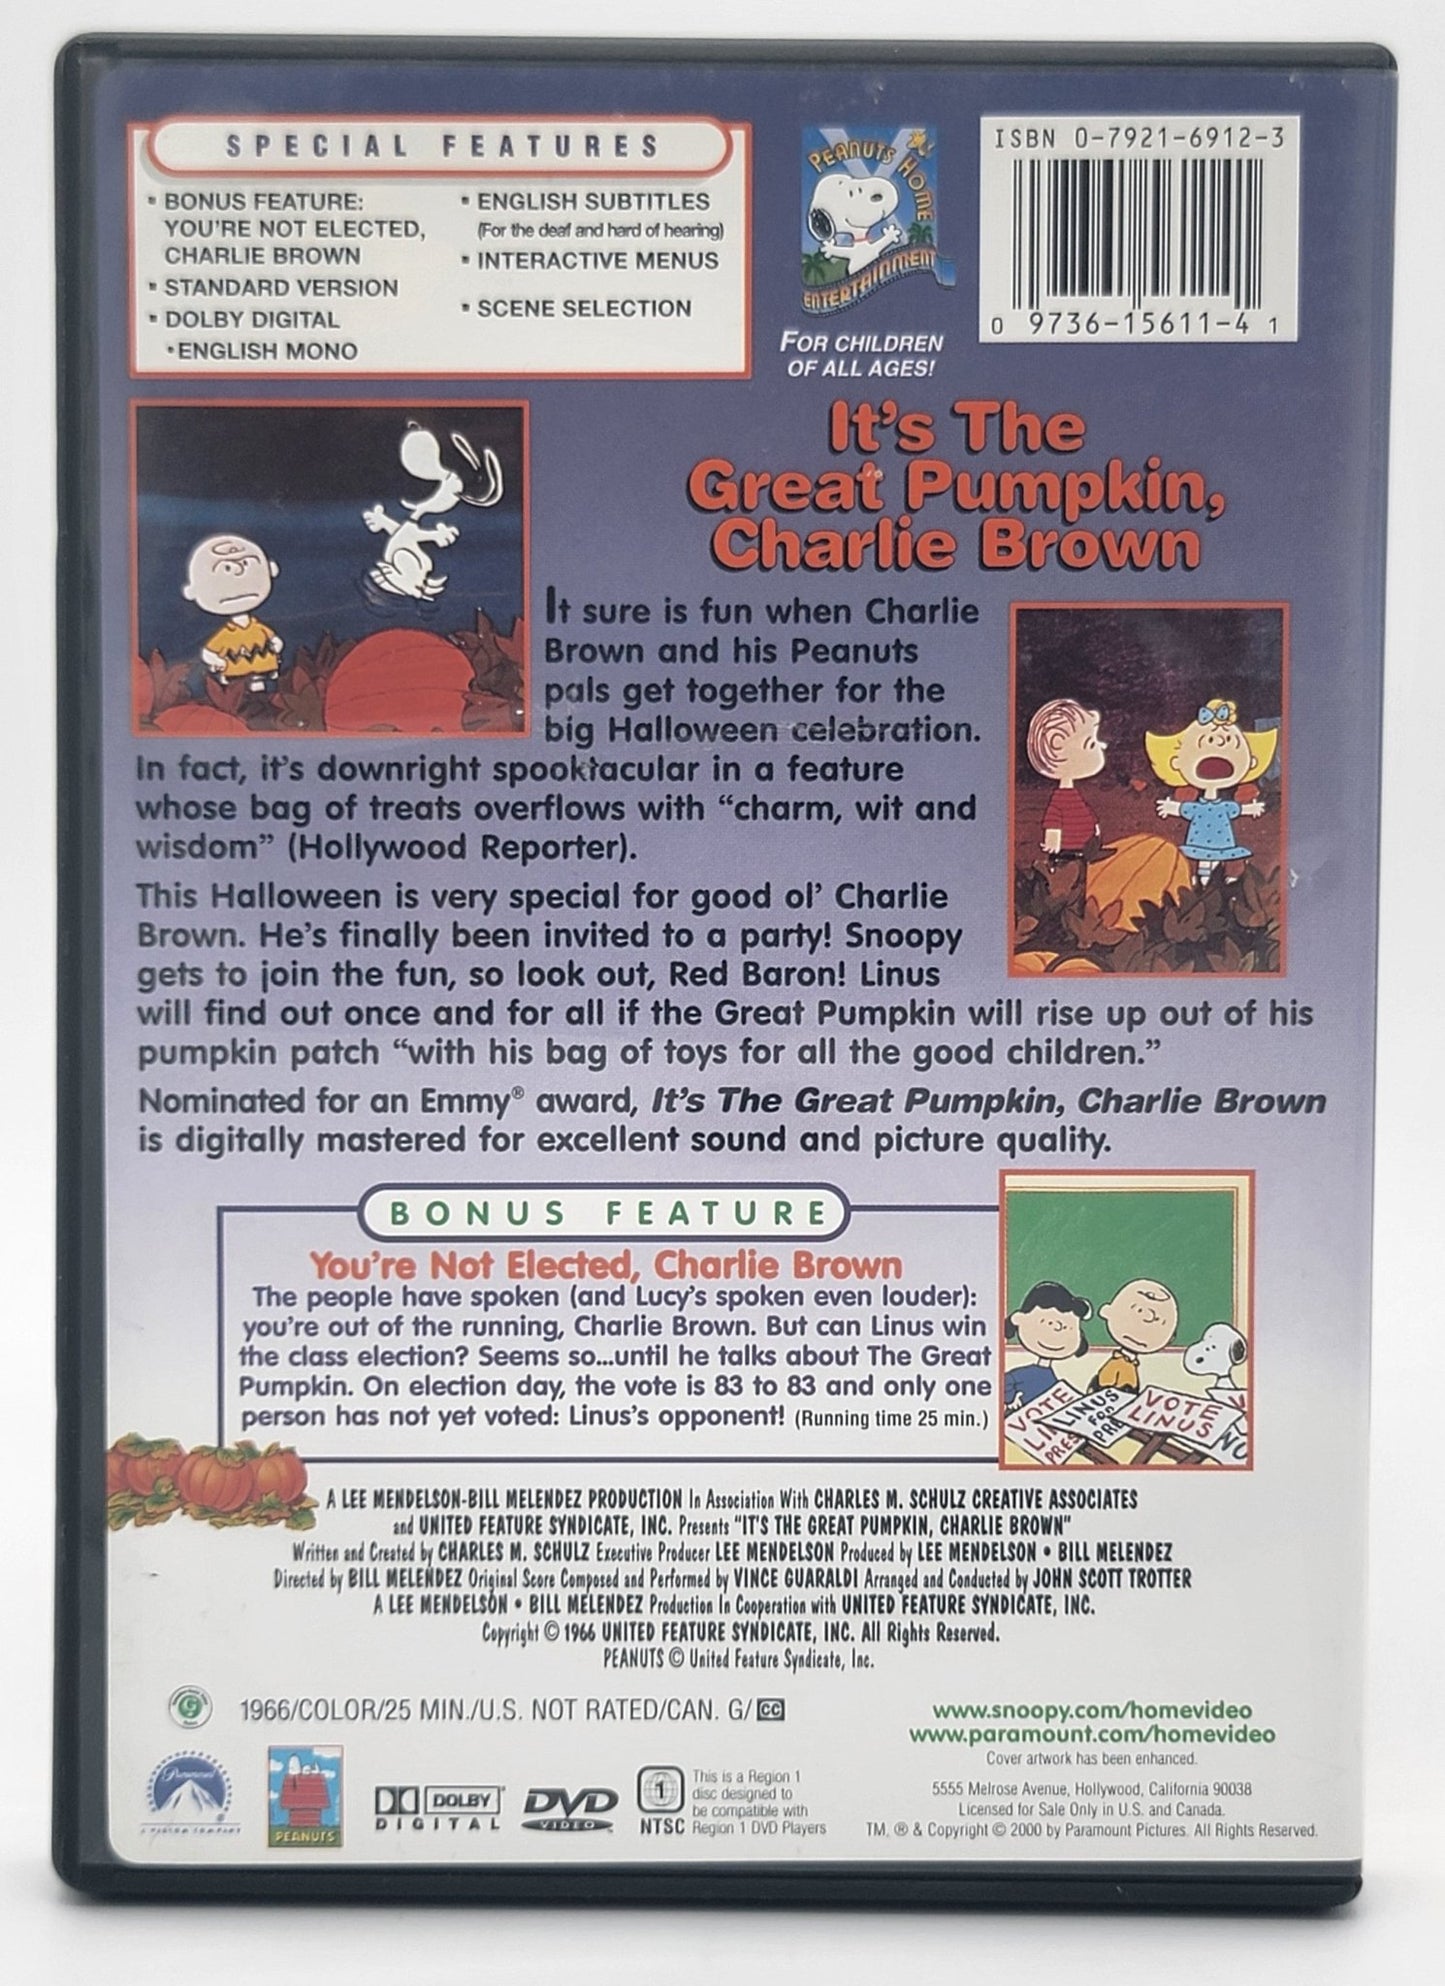 Paramount Pictures Home Entertainment - It's The Great Pumpkin Charlie Brown | DVD | Peanuts Classic - DVD - Steady Bunny Shop